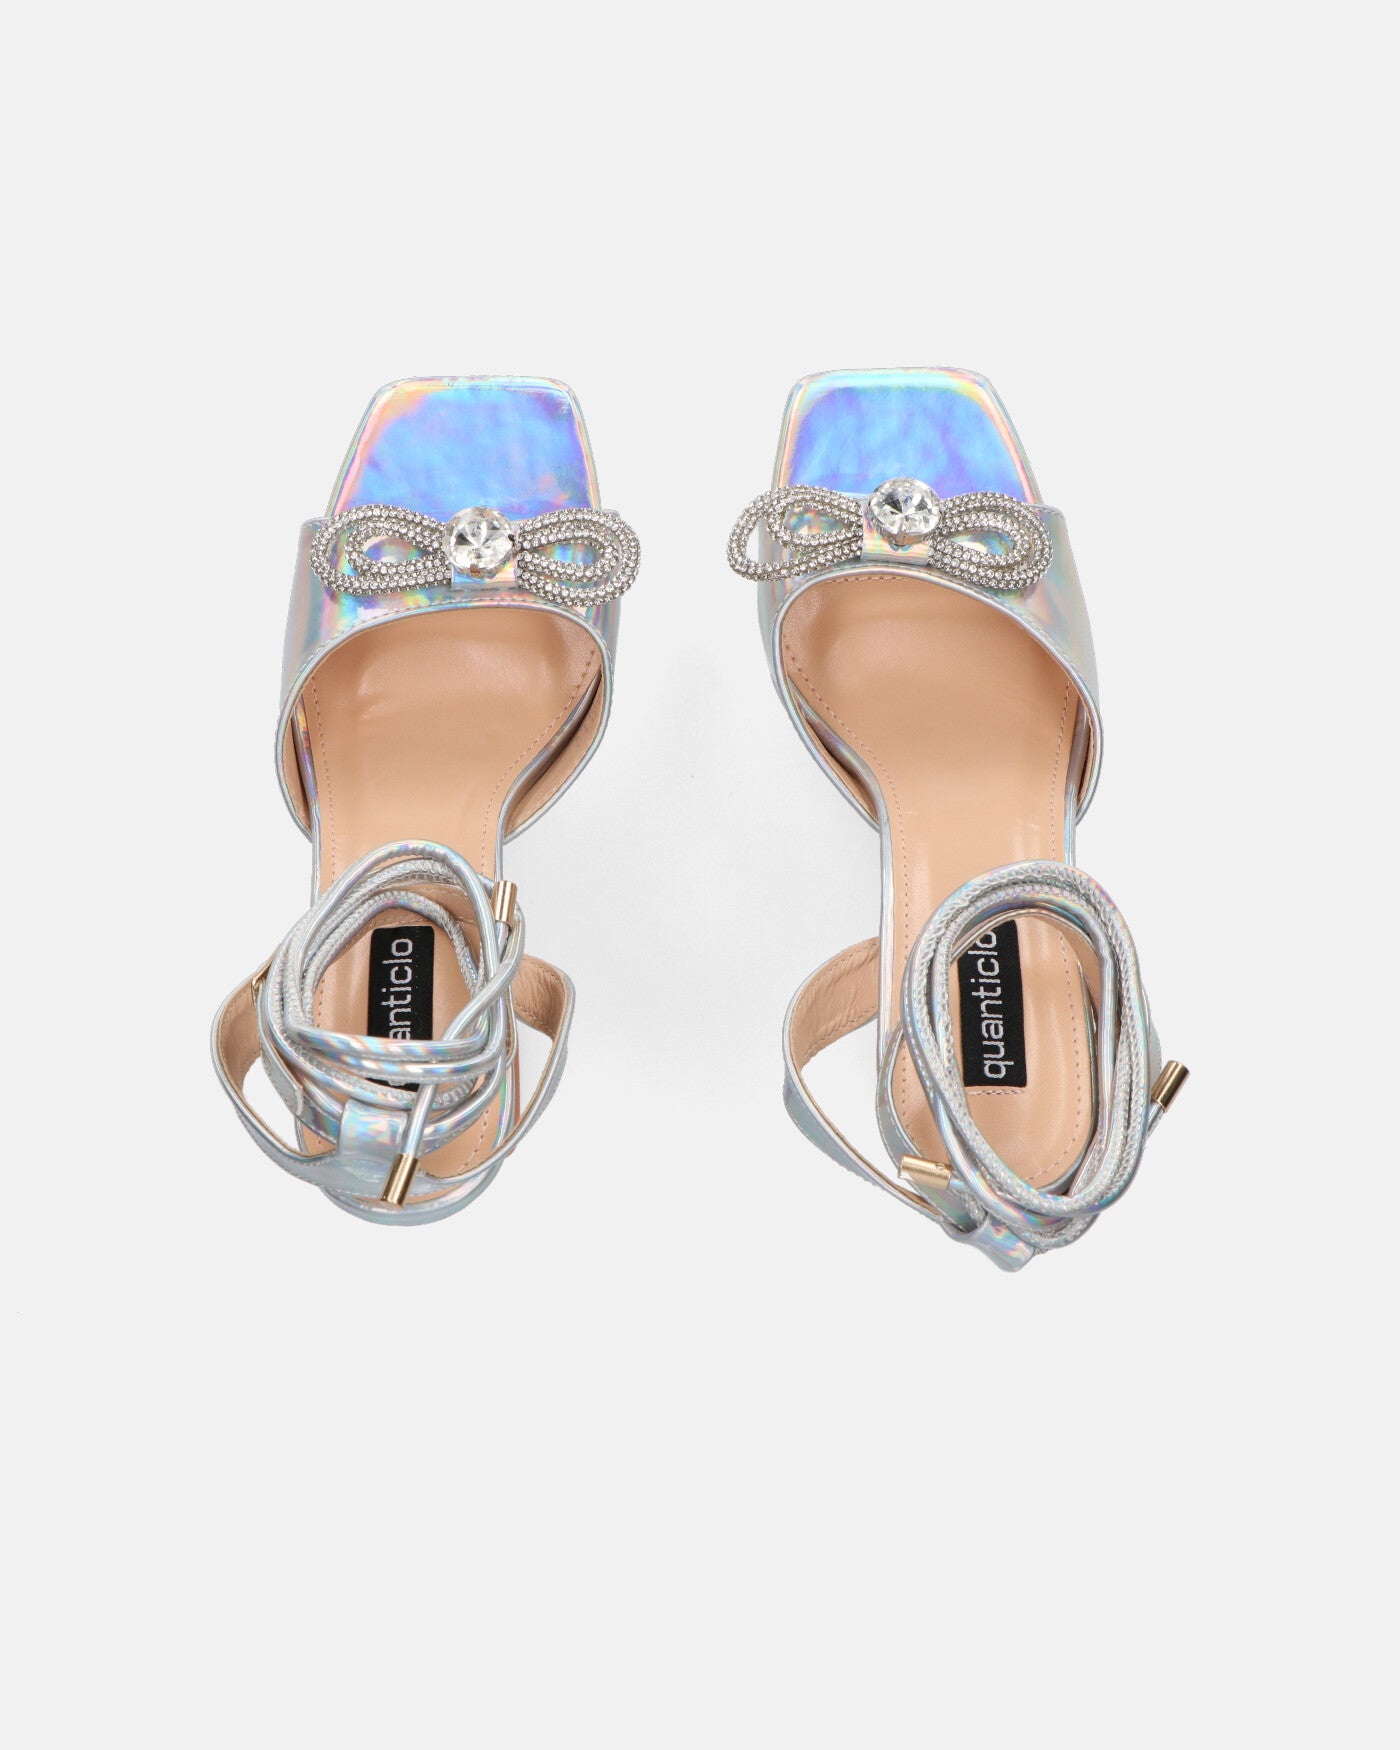 HOLLY - high heel shoes in glassy with opal effect and gems